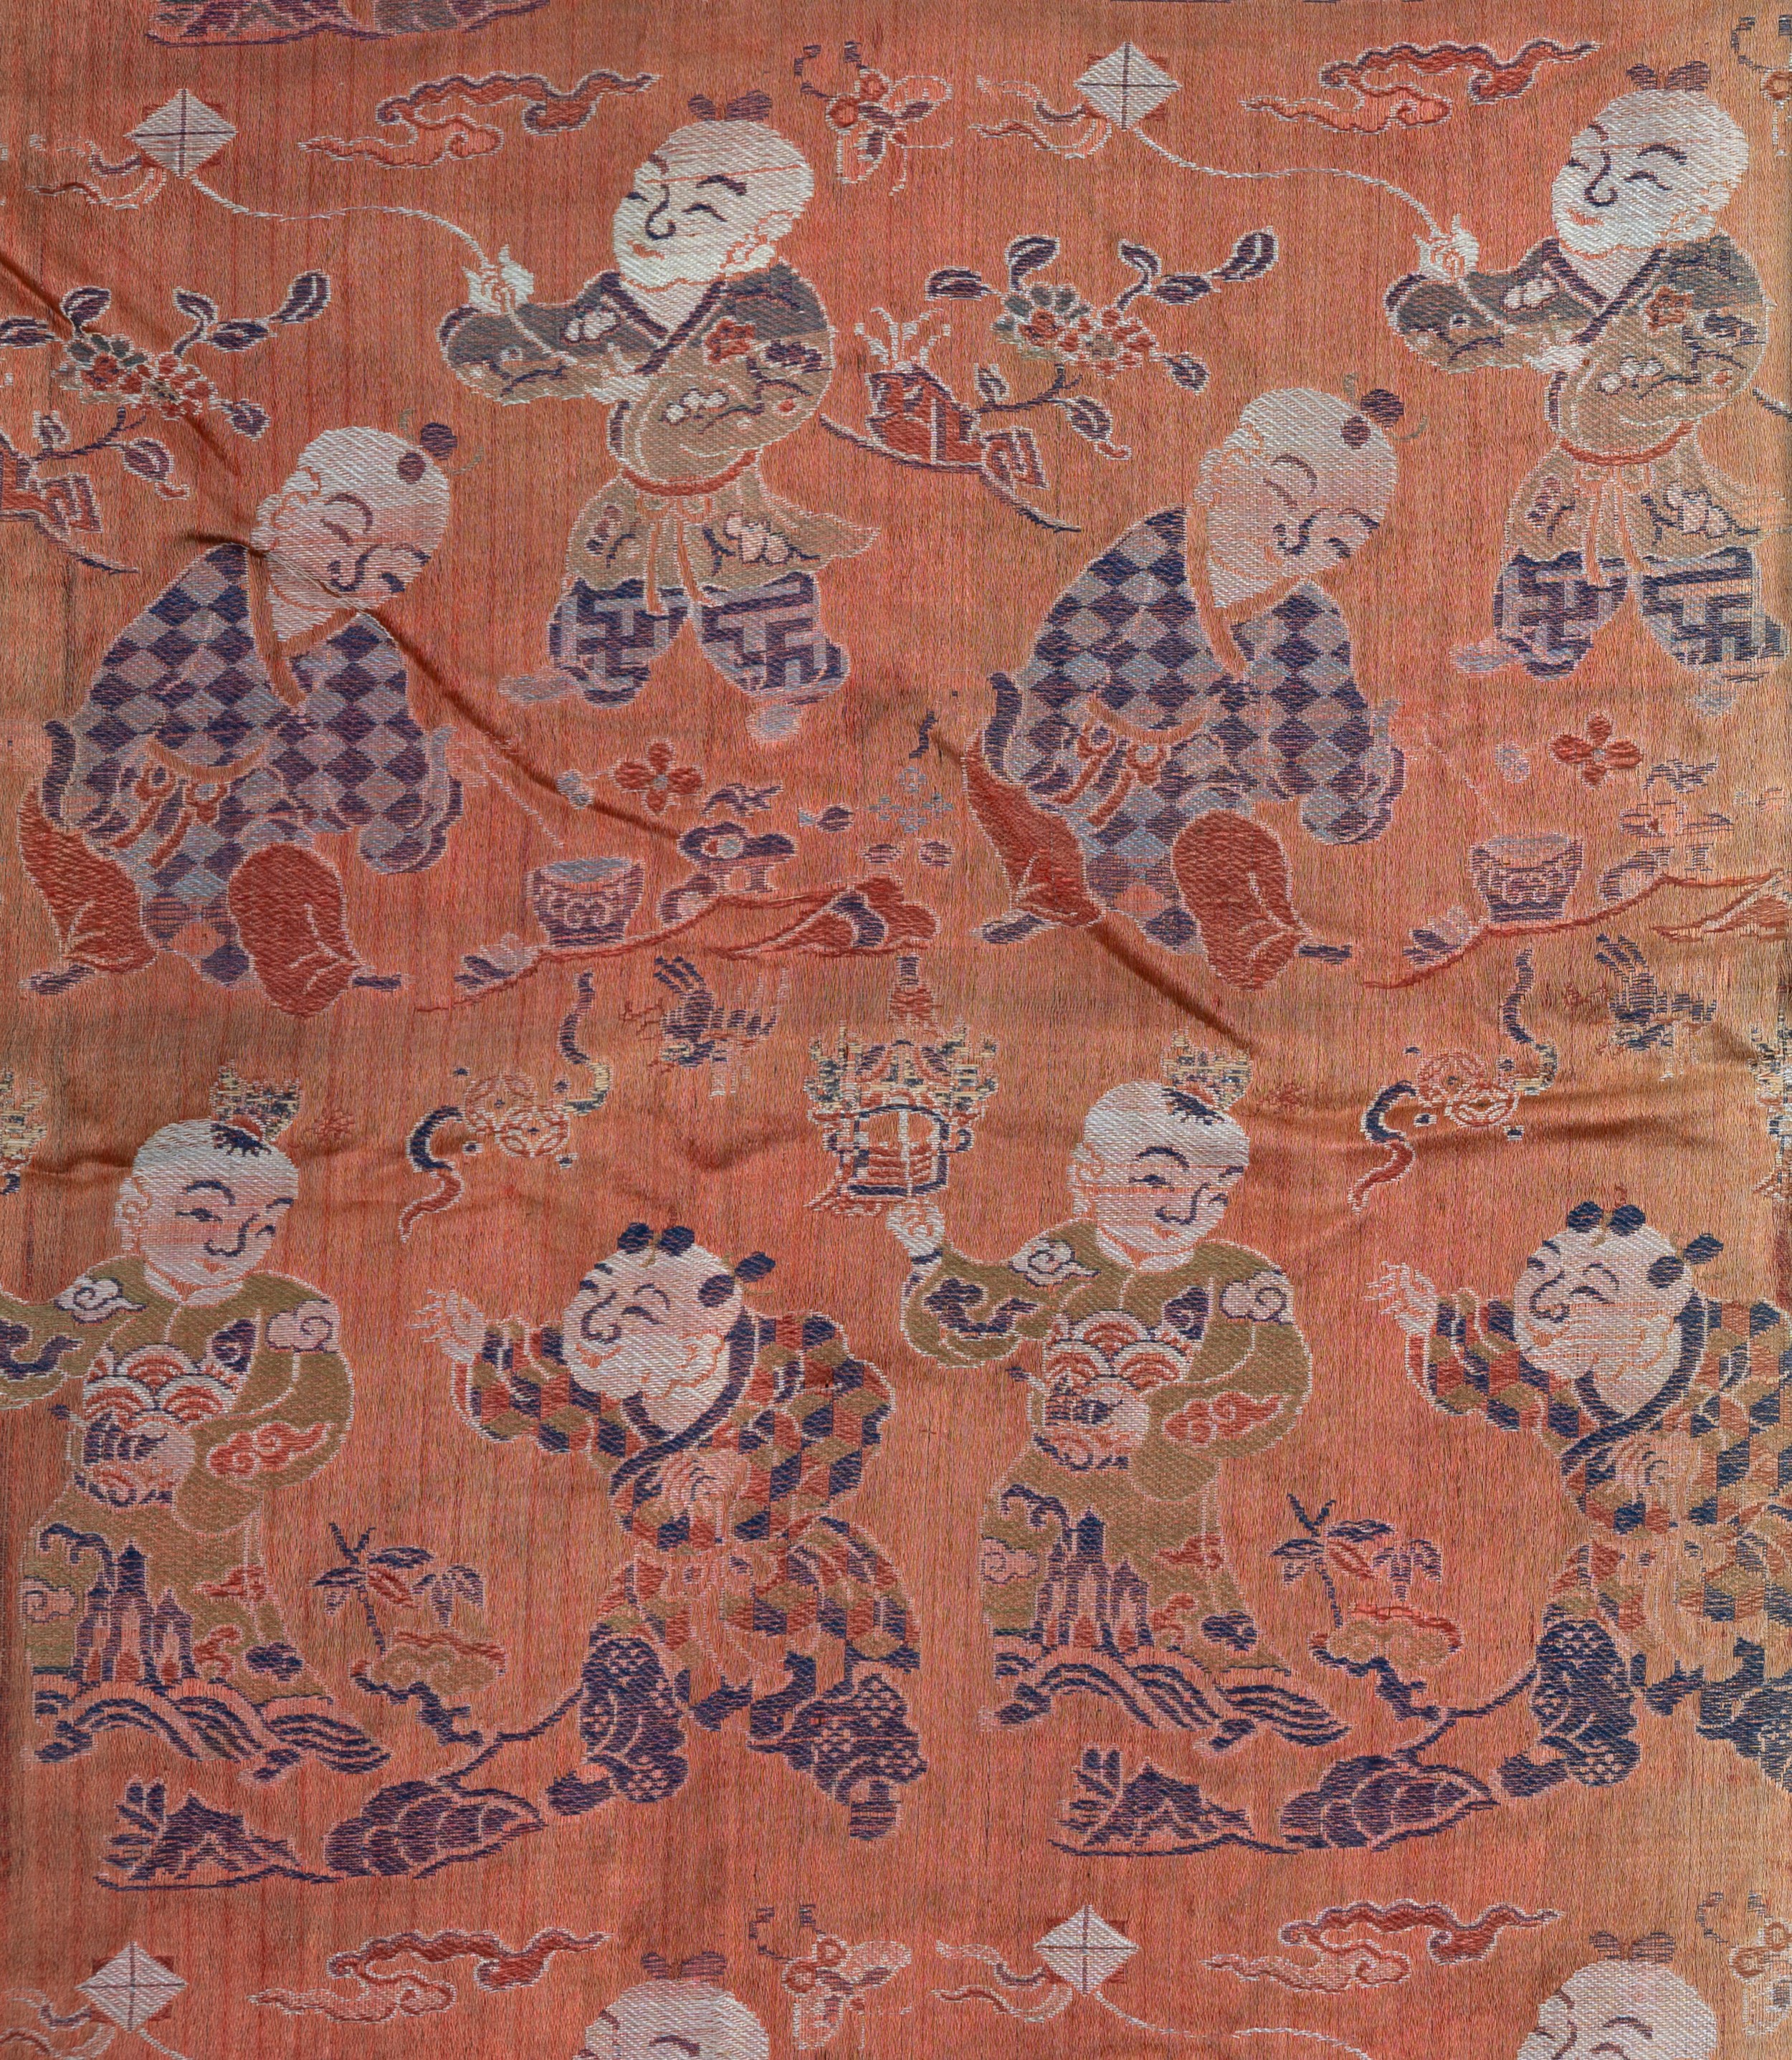 TWO VERY LARGE CHINESE 100 BOYS SILK PANELS, 17/18TH CENTURY. Each depicting rows of boys at play